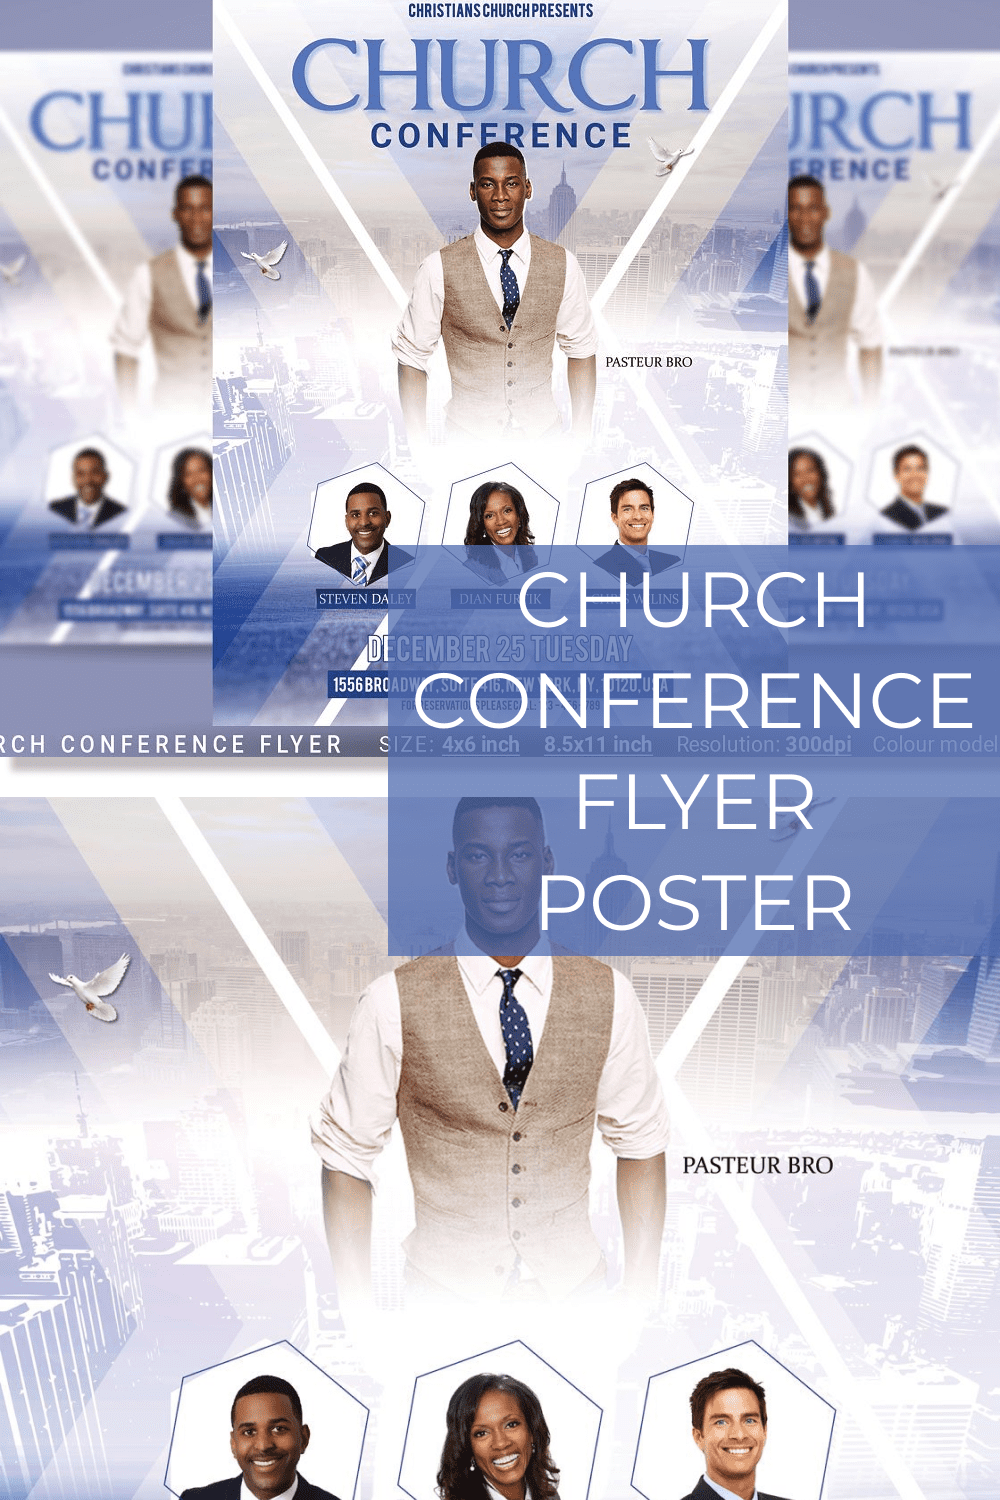 Church Conference Flyer Poster pinterest image.